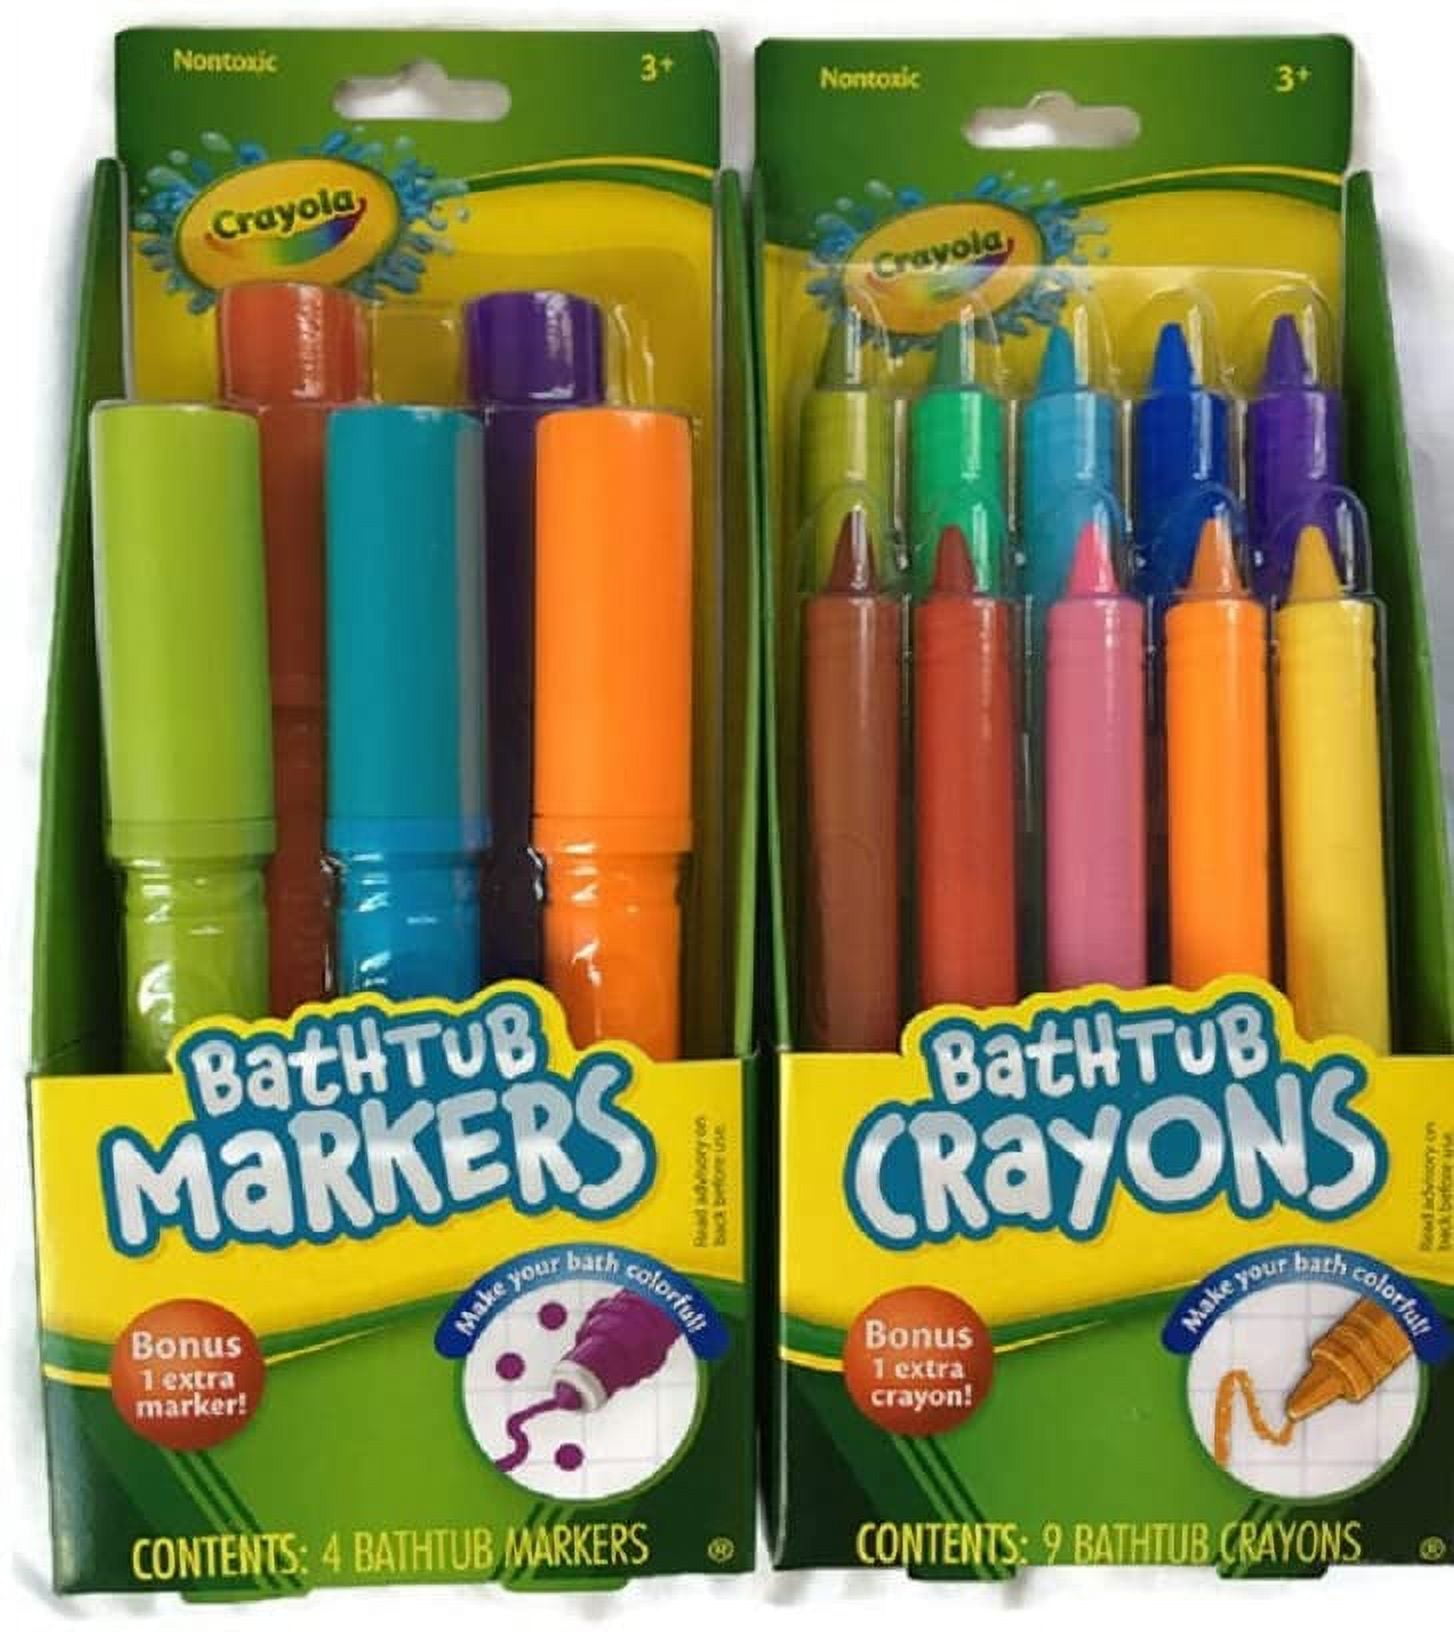 Crayola Bathtub Crayons Review, How We Tested Crayons On A Refinished Tub